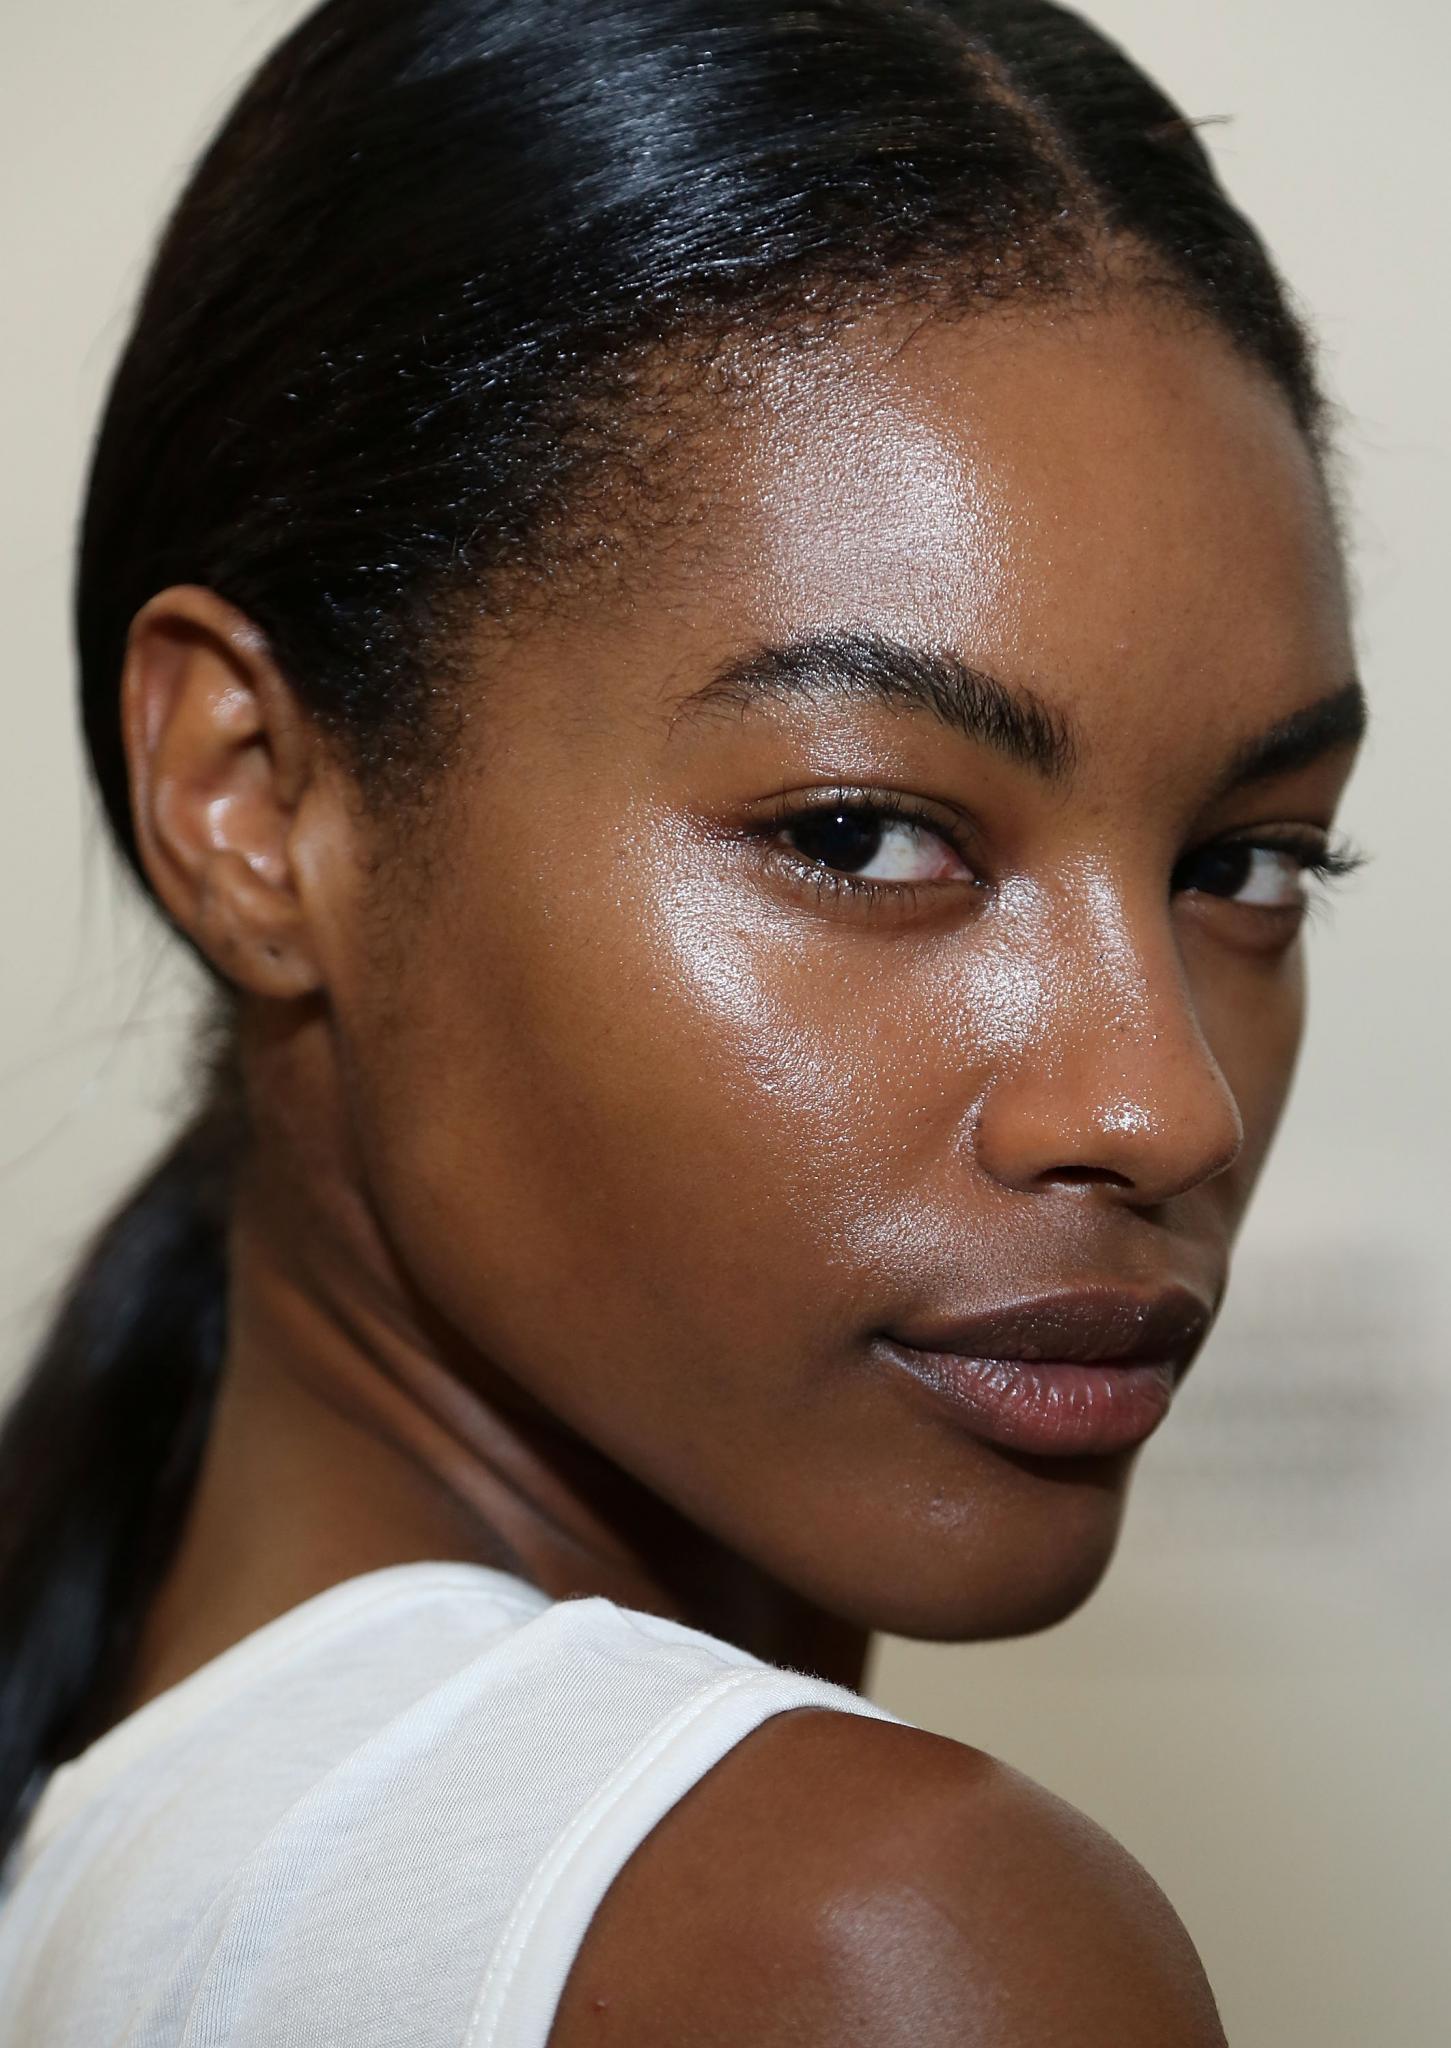 NYFW Spring '15 Models Share Their Beauty Secrets